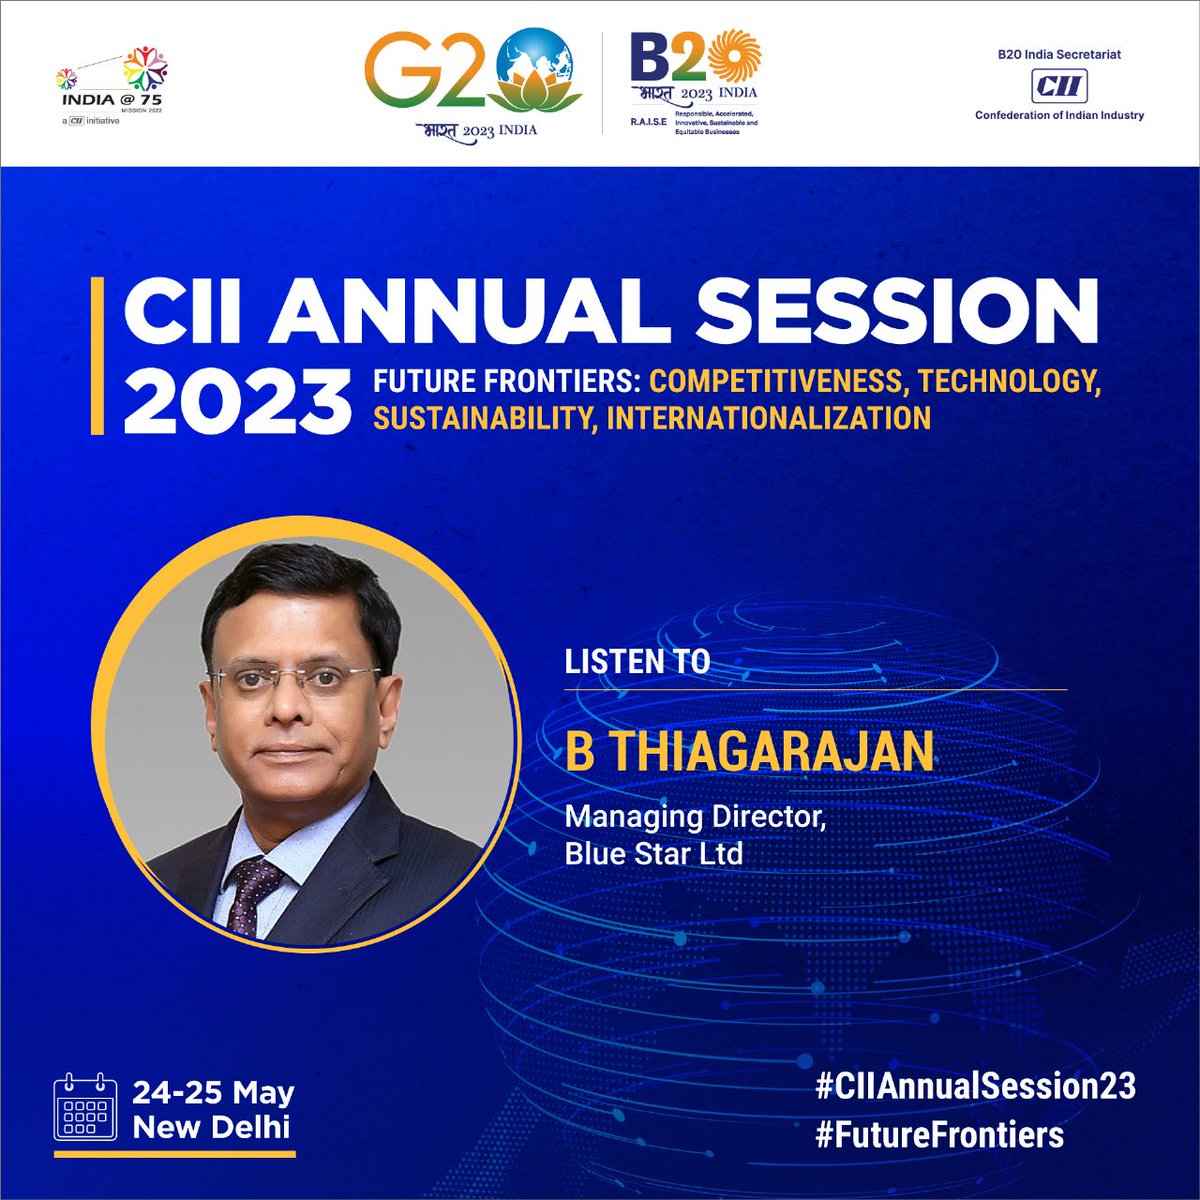 B Thiagarajan, Managing Director, Blue Star Ltd shares thoughts at the #CIIAnnualSession23.
#StayTuned for interesting discussions on macroeconomic developments, #Growth, reforms & #investment climate.
Visit➡ciiannualsession.in/index.html
#FutureFrontiers #technology #Sustainability…